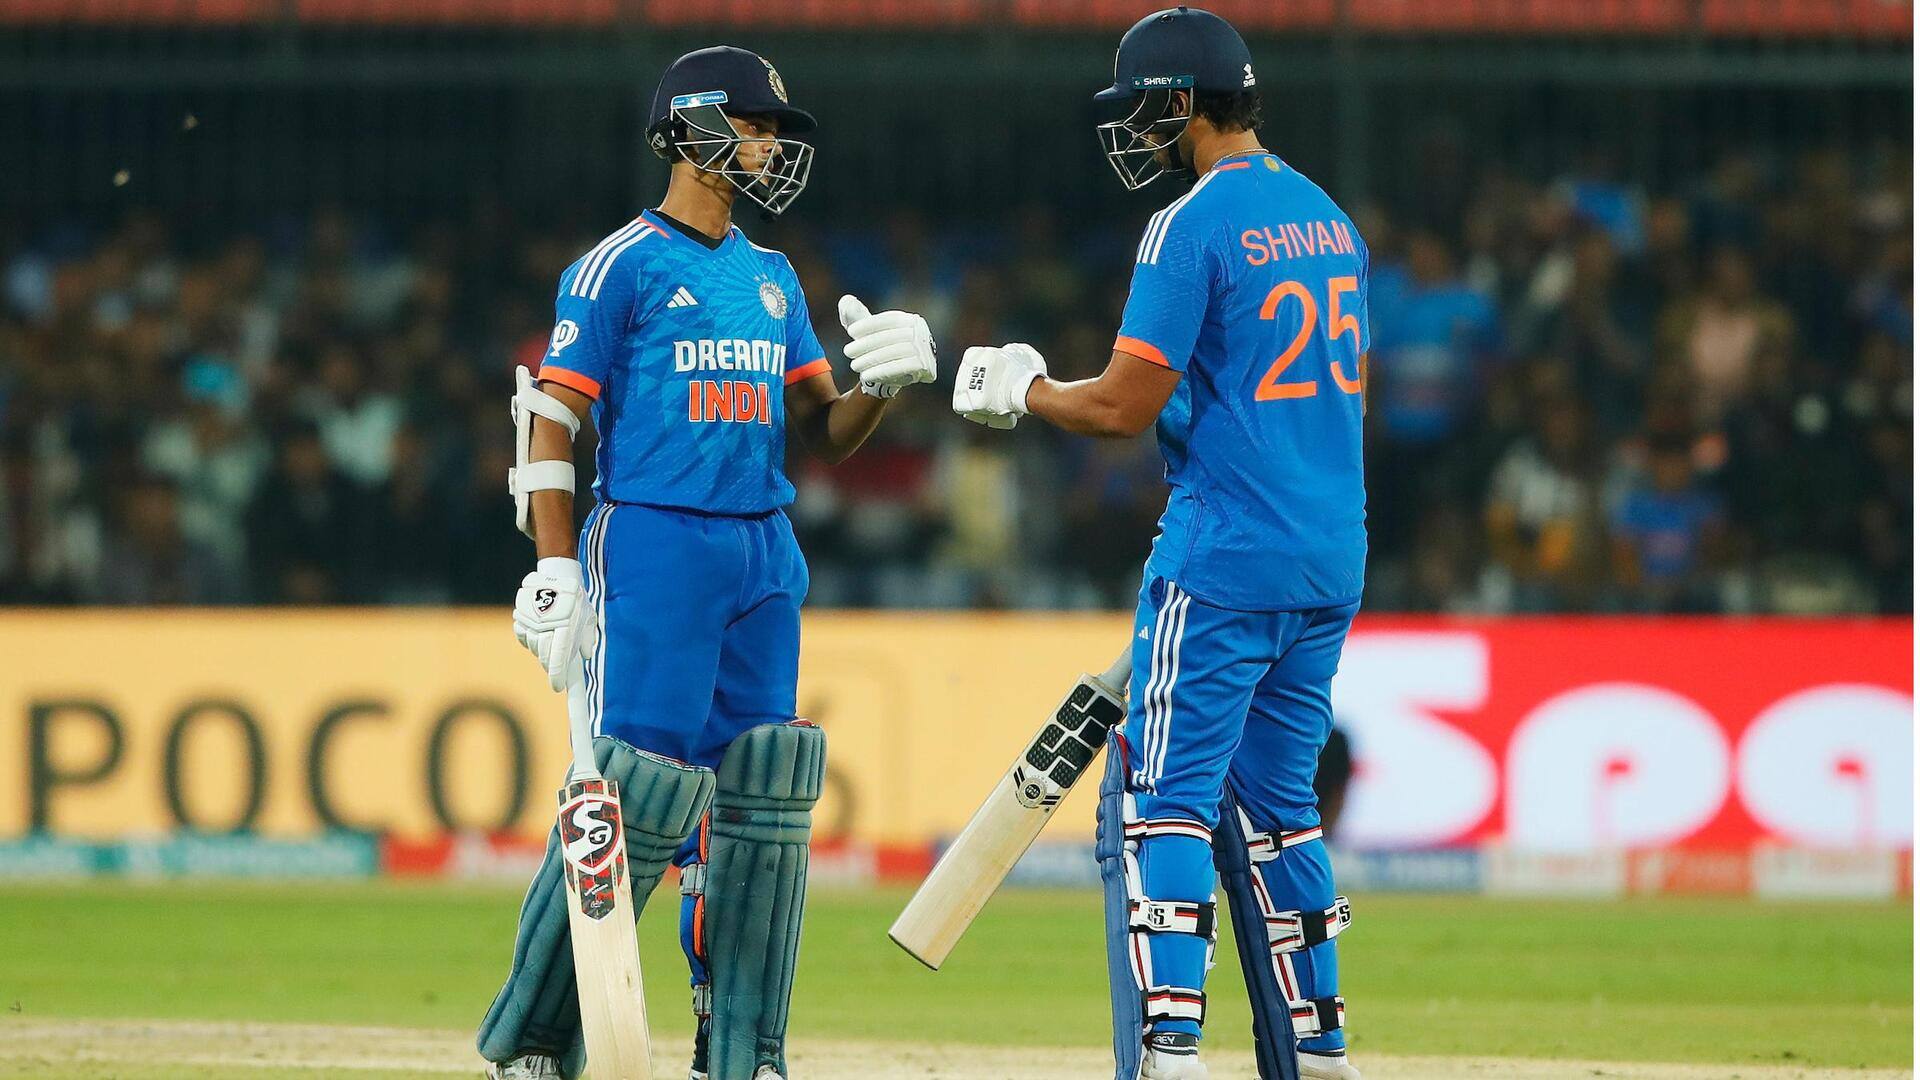 India thrash Afghanistan in 2nd T20I, seal series: Key stats